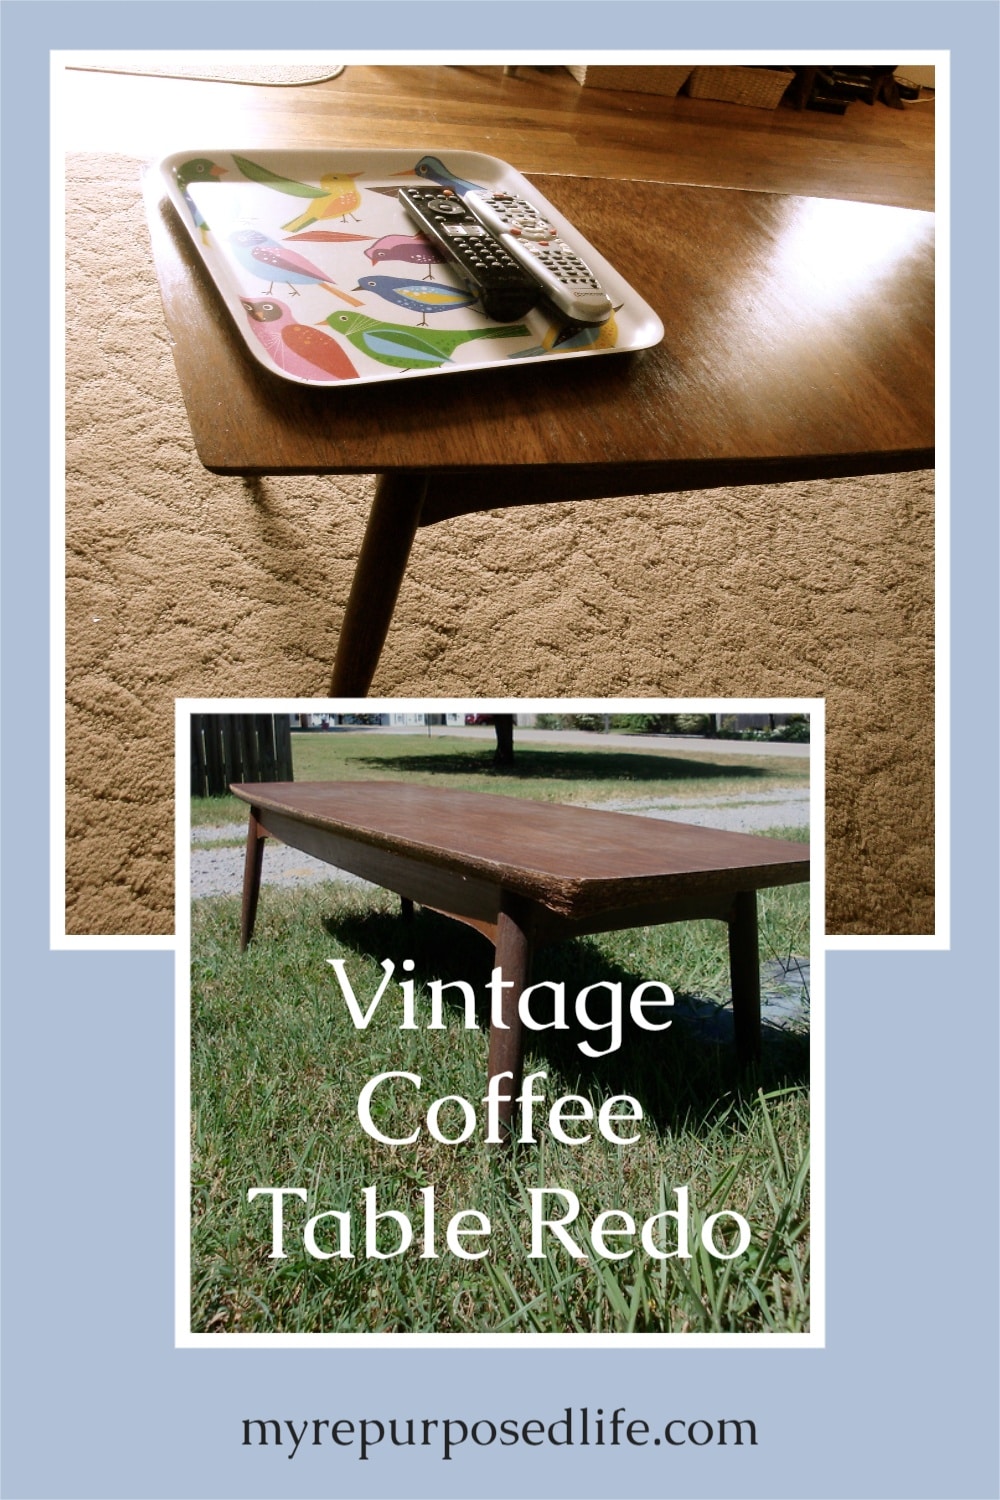 How to give a damaged vintage coffee table a new top and a new lease on life! Ten years later, the table is still hanging in there in it's new home. The table is probably going on 60-70 years old! They don't make them like this anymore. #myrepurposedlife #table #makeover via @repurposedlife